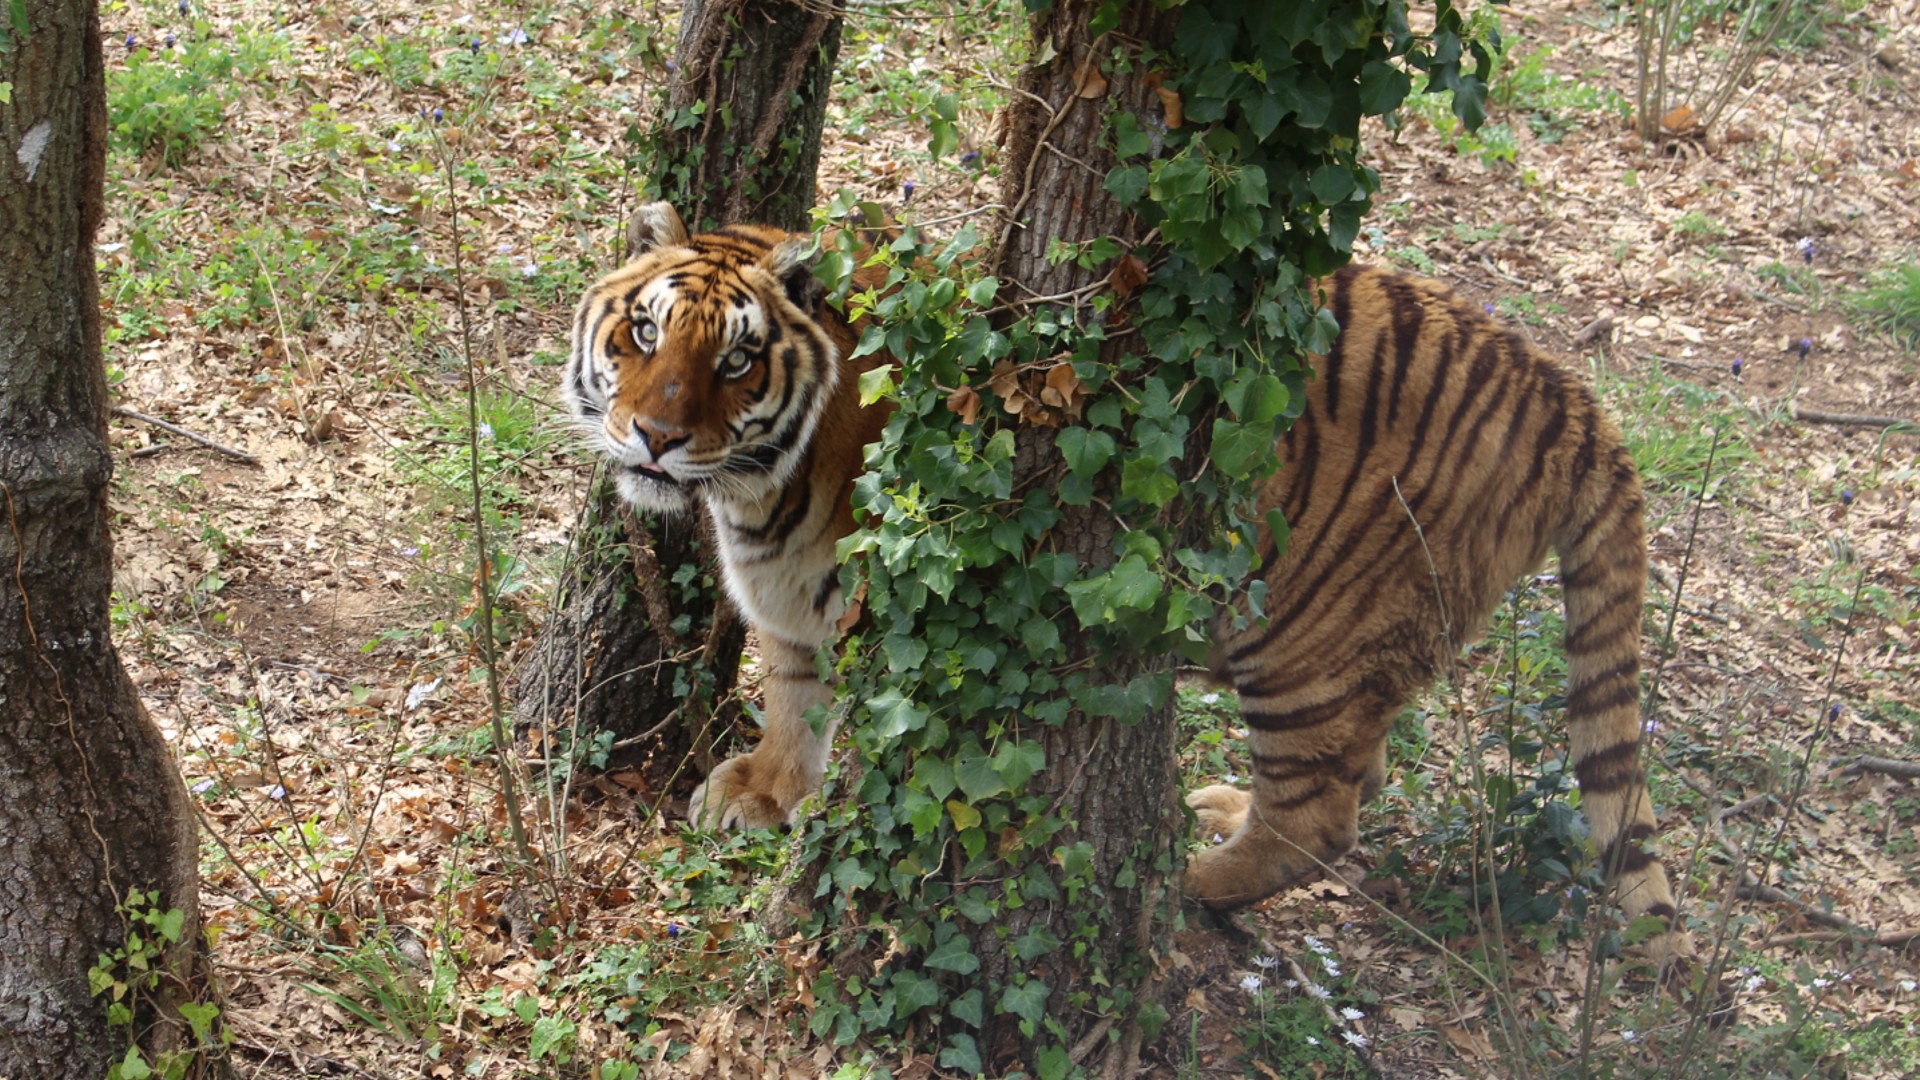 A tiger standing in between two trees looking up at the camera